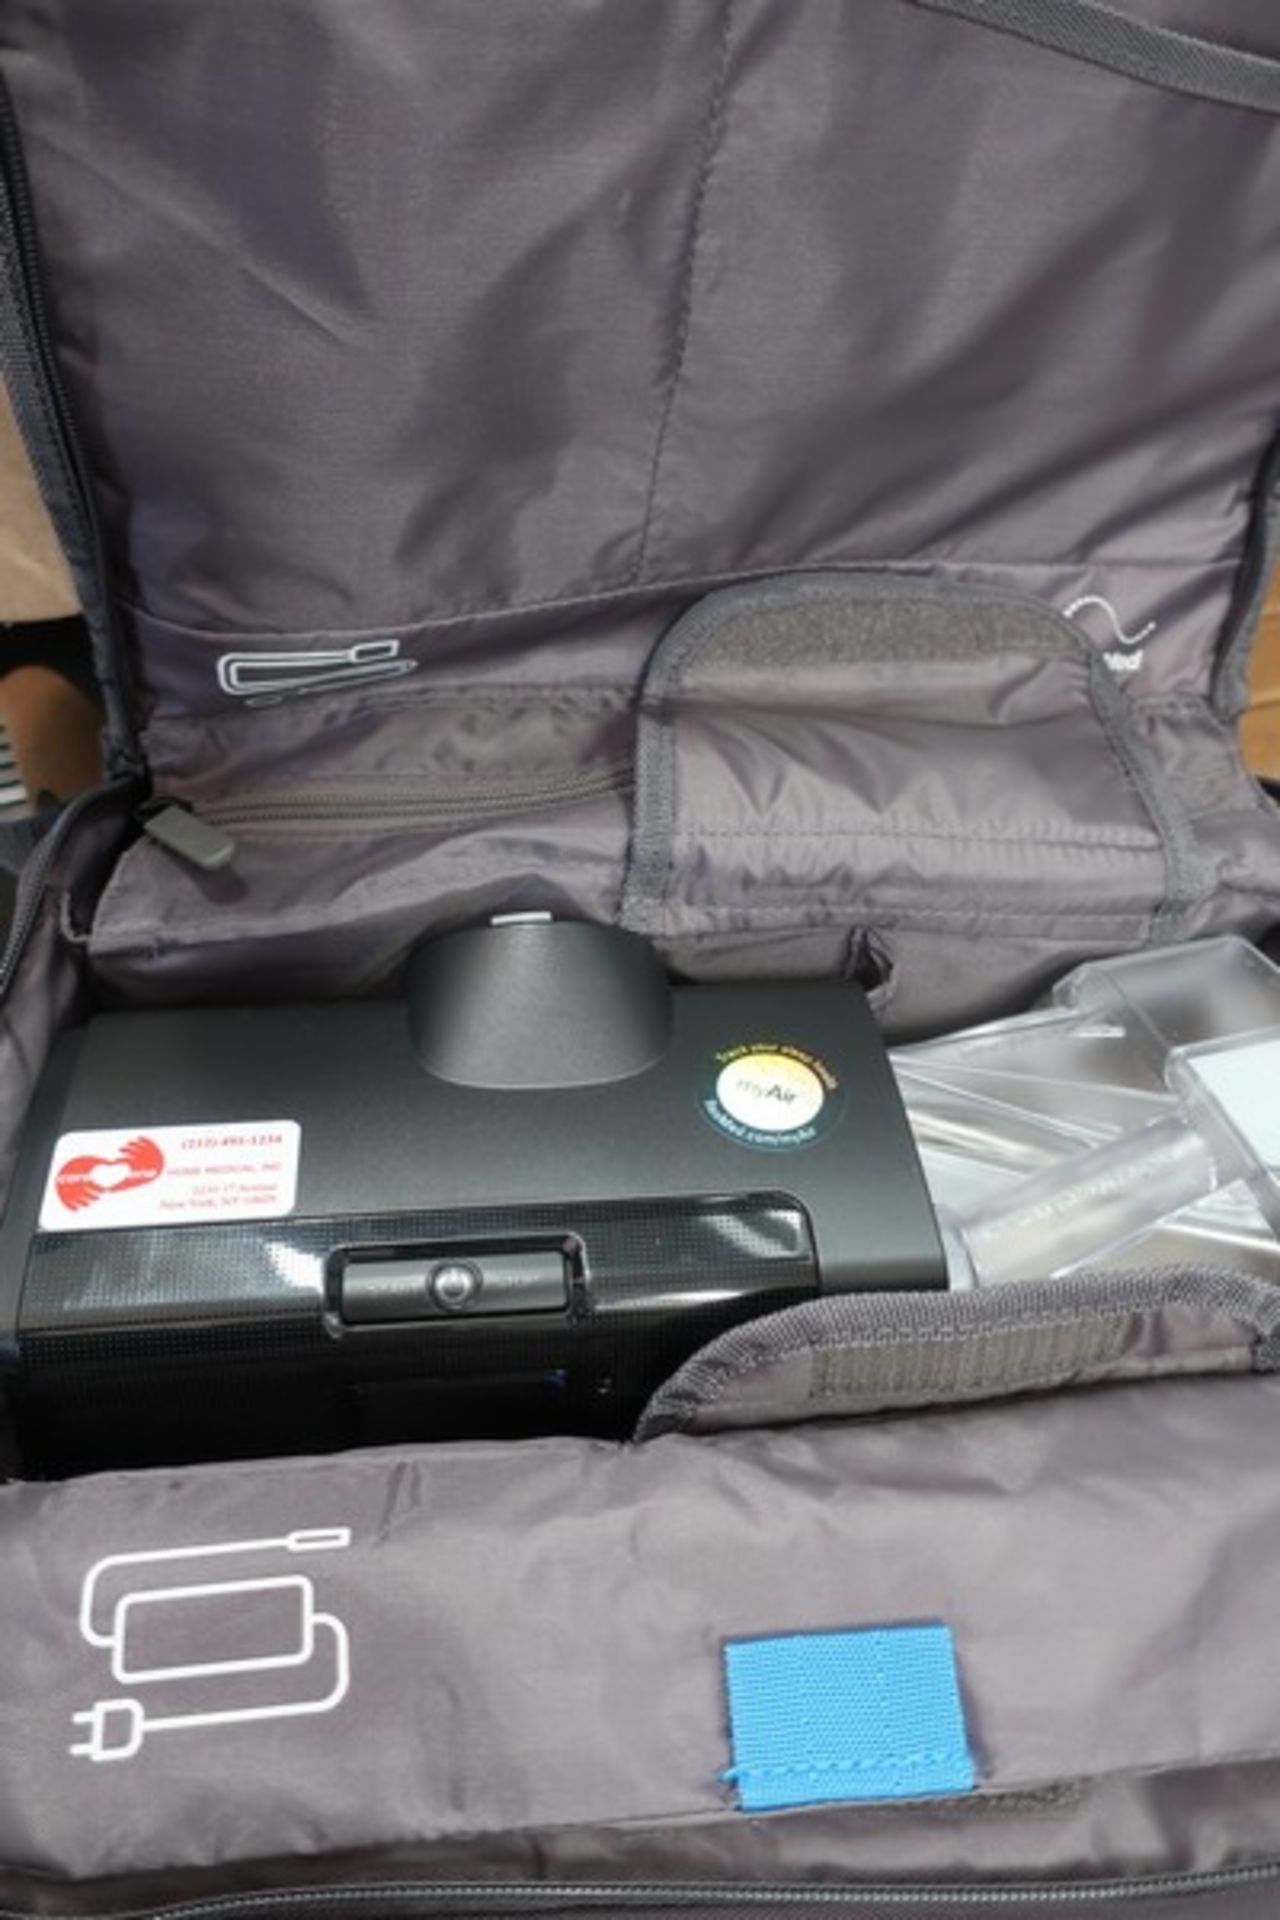 A pre-owned Resmed Airsense 10 Auto CPAP machine with power adapter in carry case. - Image 4 of 5